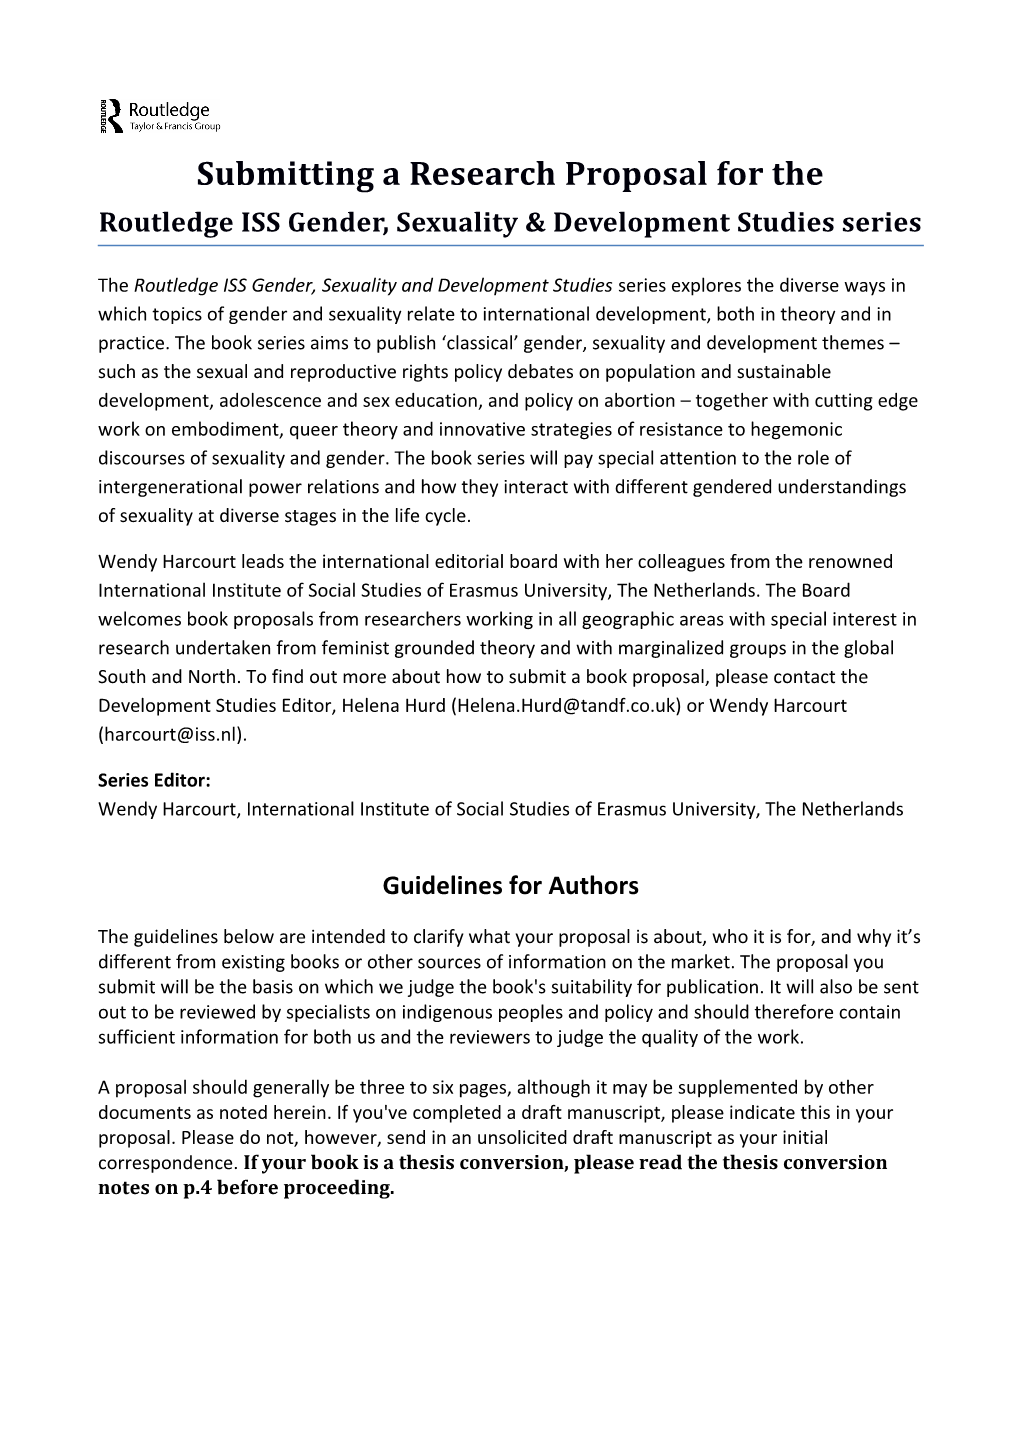 Submitting a Research Proposal for the Routledge ISS Gender, Sexuality & Development Studies